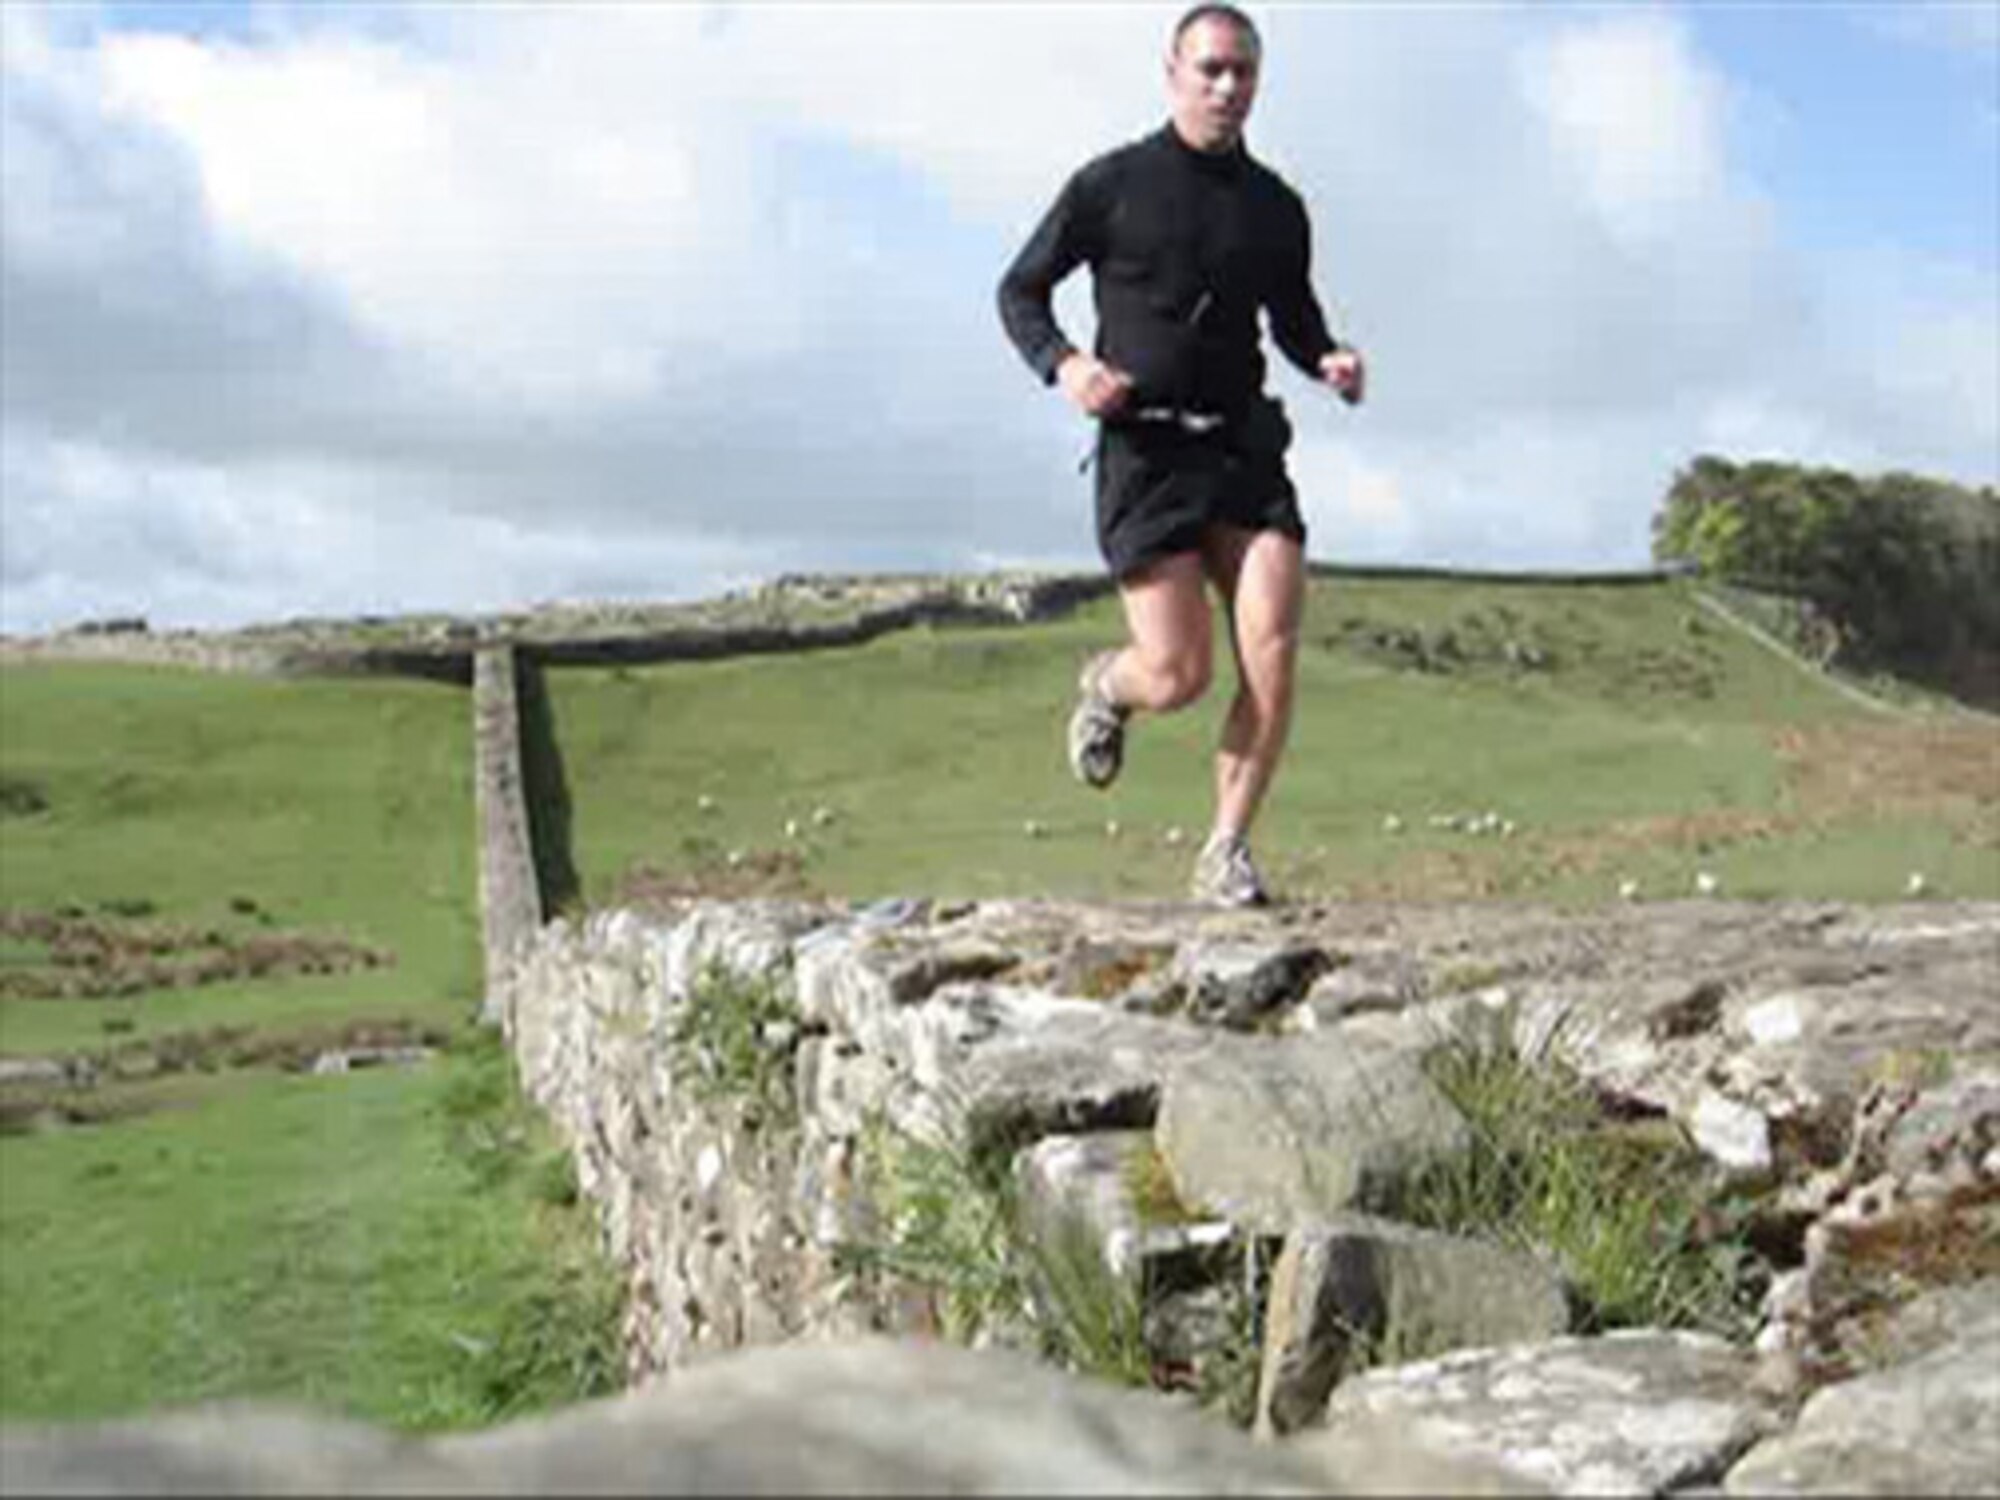 Capt. Danny Franz, 67th Special Operations Squadron, runs the Hadrian's Wall Path May 14. Hadrian's Wall itself is 73 miles long, but the path stretches for 84 miles. It runs along a riverside route in Tyneside, through farmland in Tynedale, Northumberland, and gradually descends to the pastures of Cumbria, before finally ending at the salt marshes of the Solway Estuary. Captain Franz ran the wall in 19 hours and 24 minutes, beating the unofficial record of just over 23 hours. (Courtesy photo)